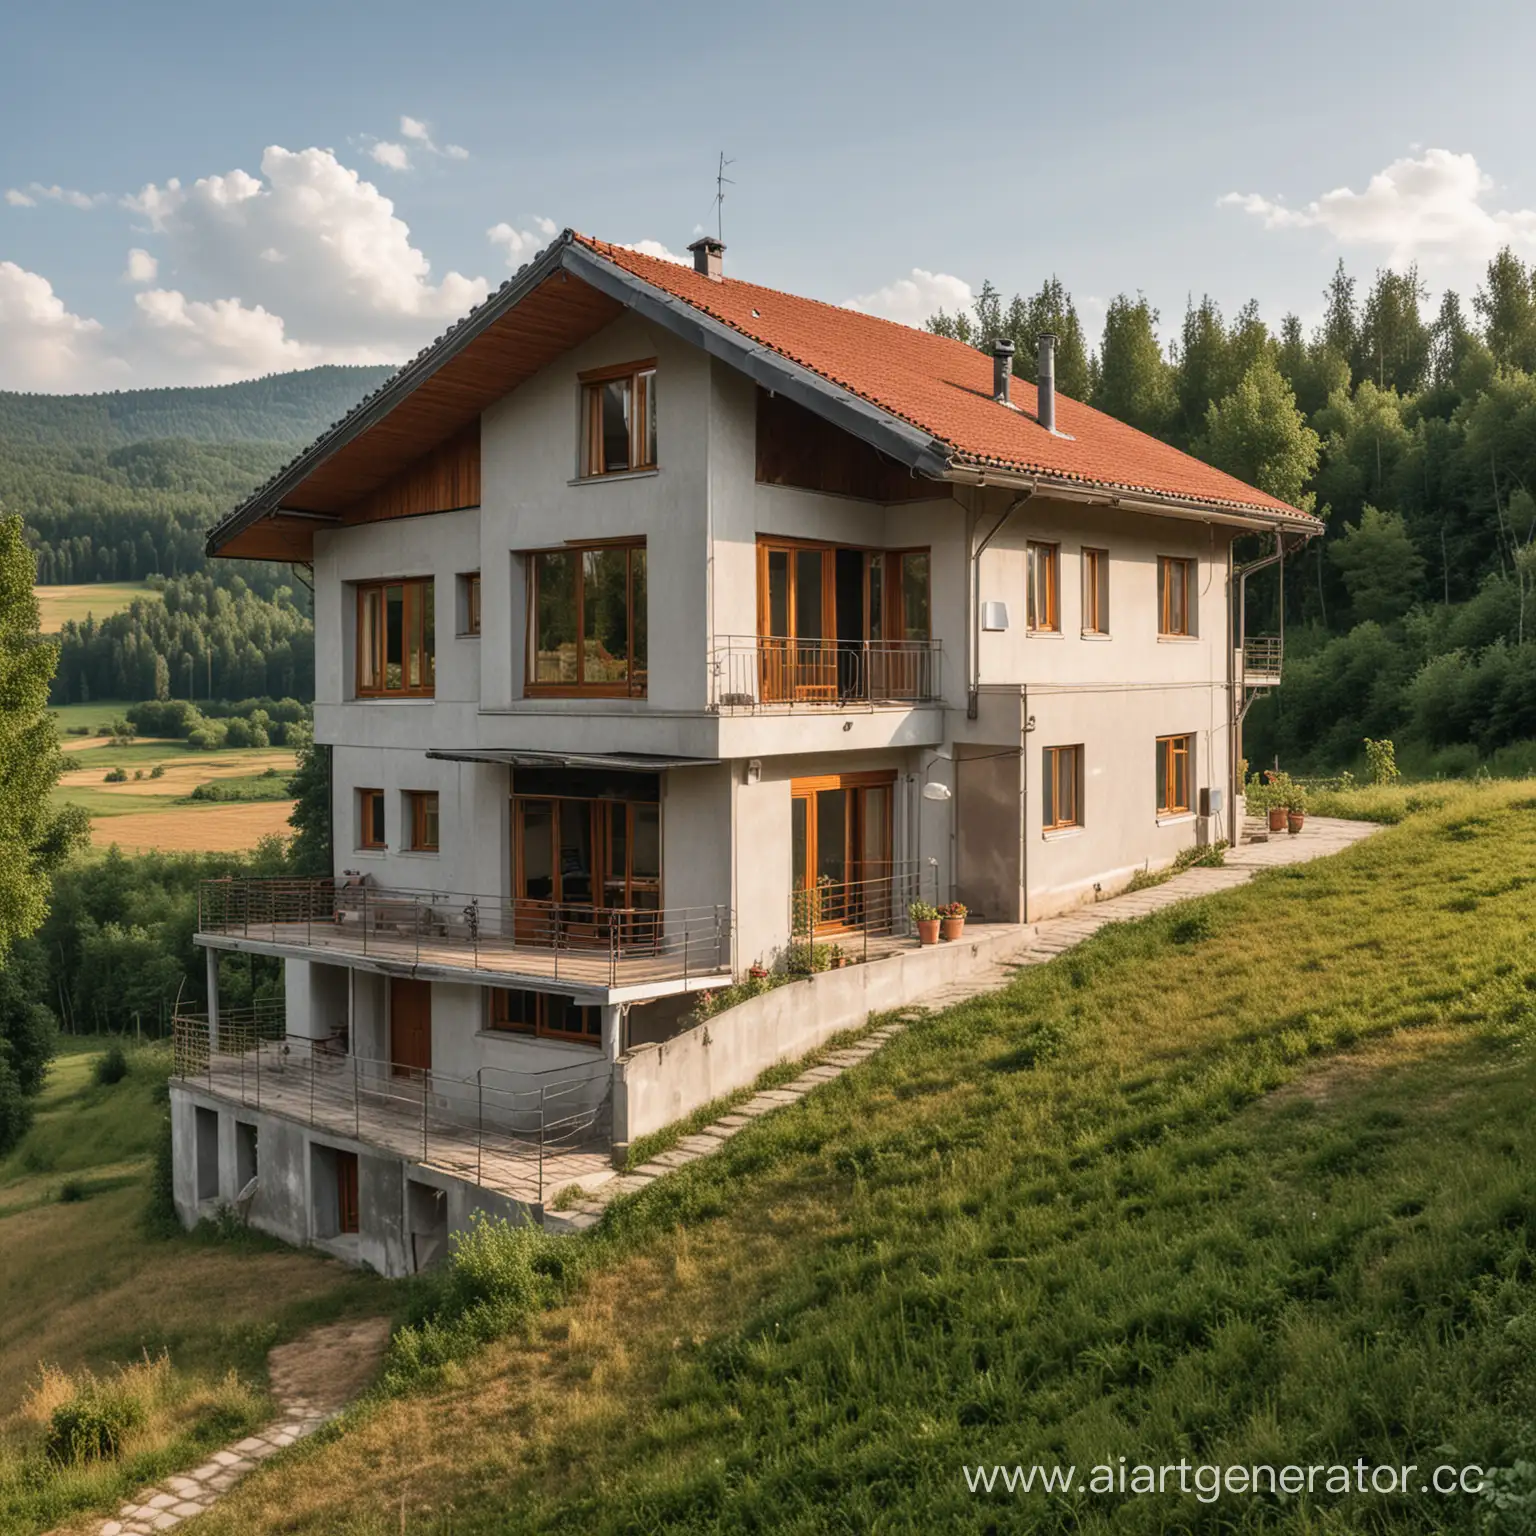 Rustic-Rural-SingleApartment-Home-with-Sloping-Roof